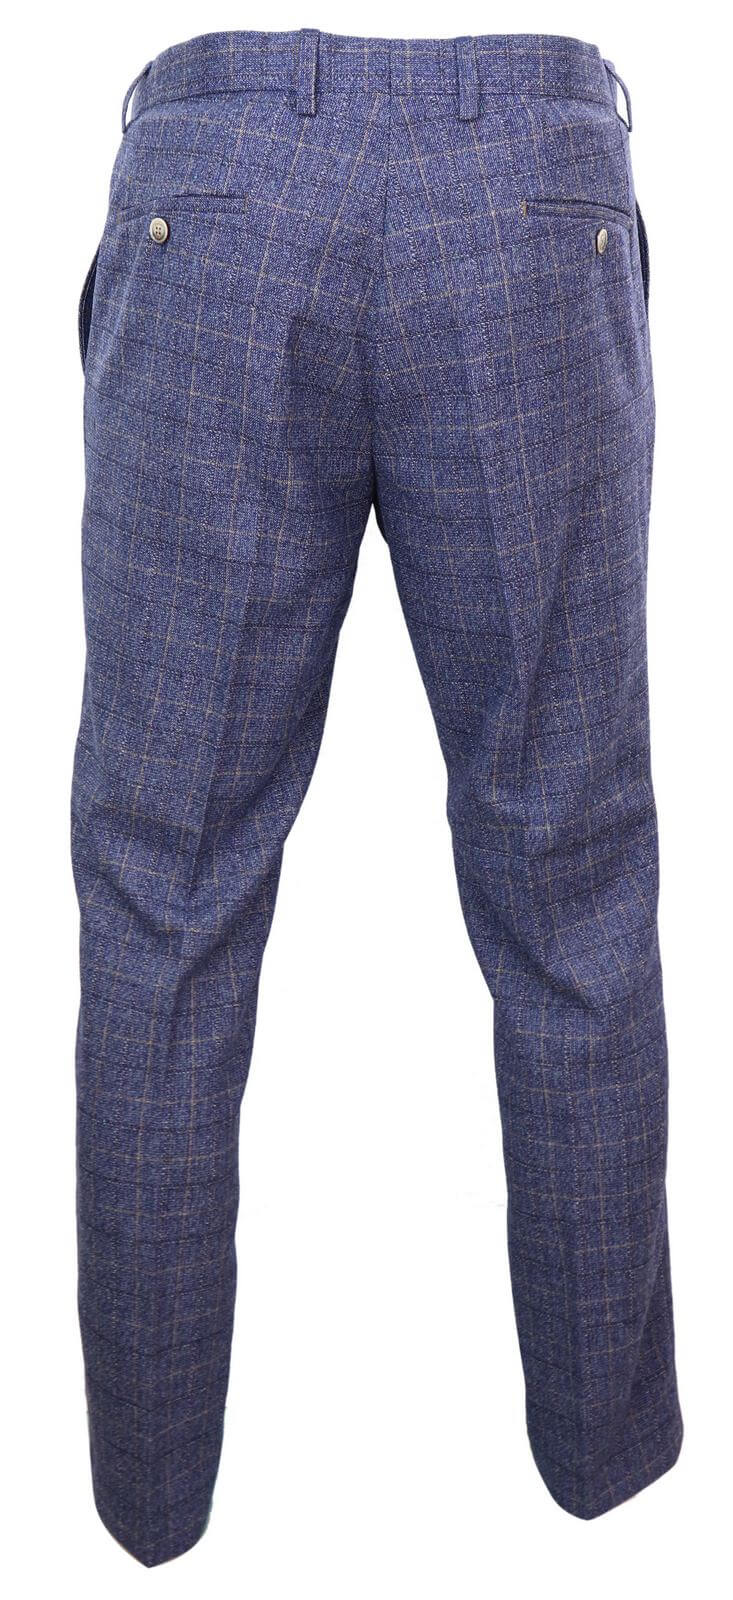 Lars Amadeus Men's Business Checked Printed Slim Fit Flat Front Plaid Dress Trousers  Blue 32 : Target